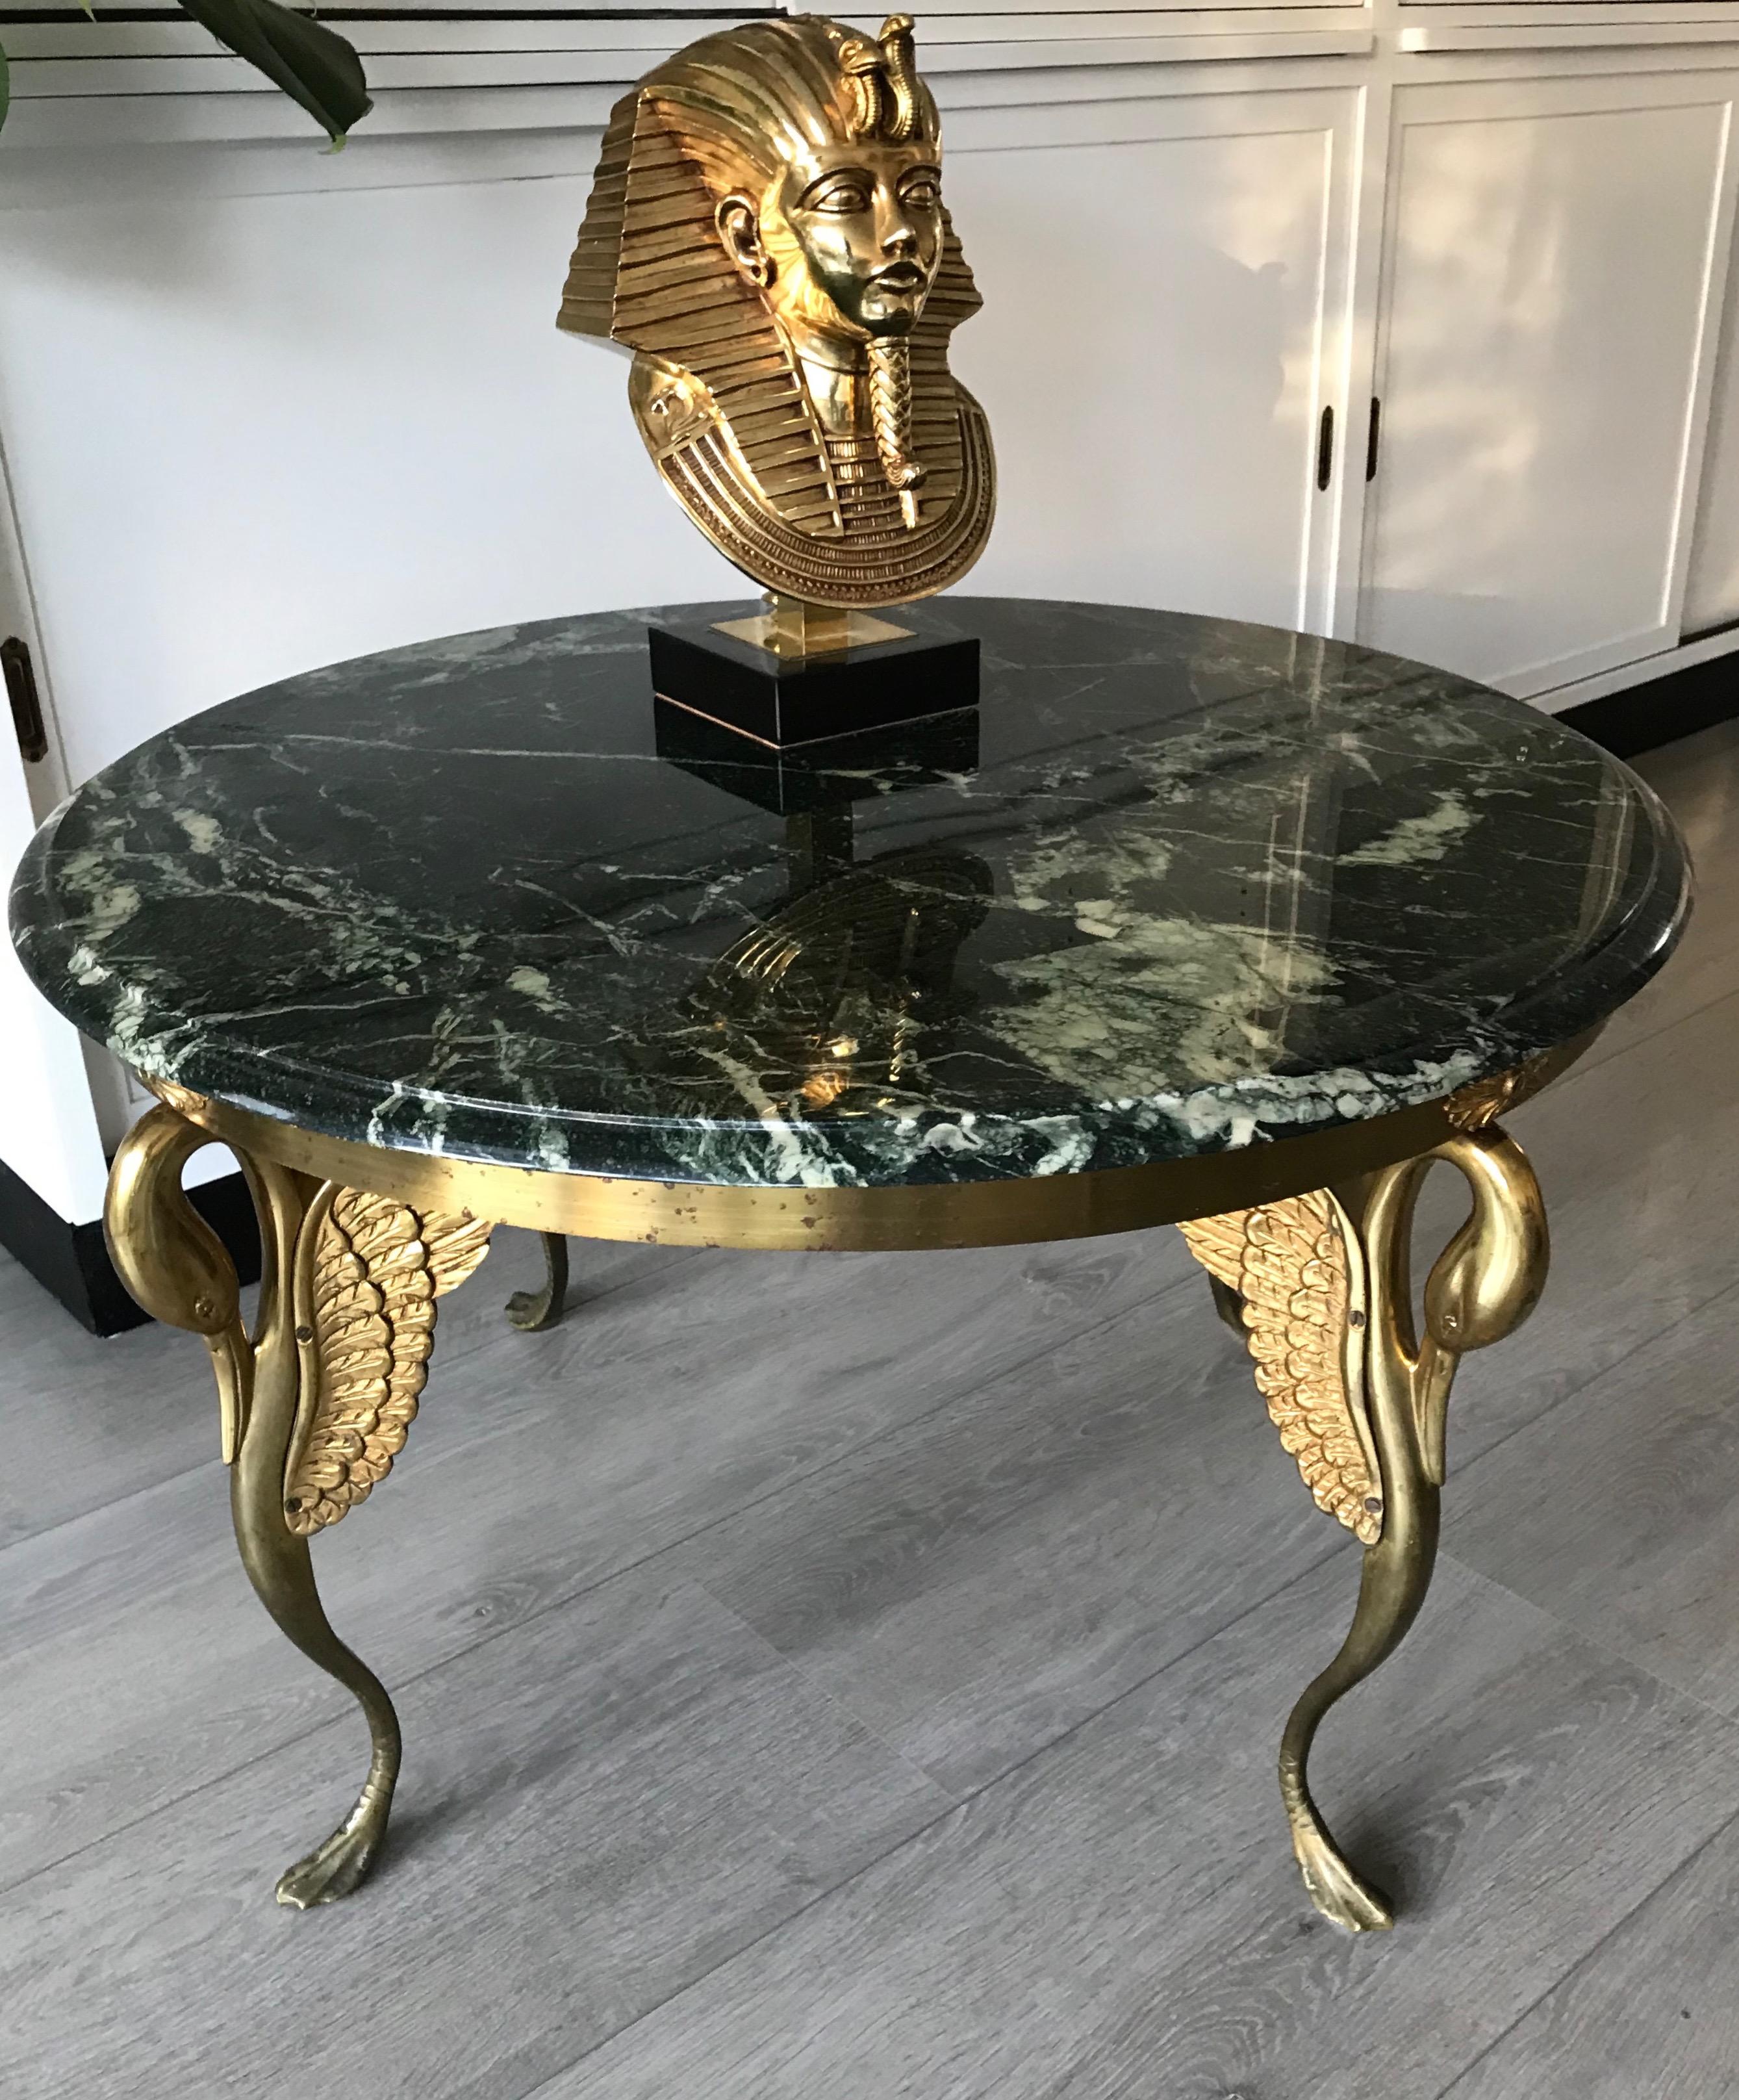 Midcentury Empire Style Coffee Table with Marble Top and Bronze Swan Sculptures 9